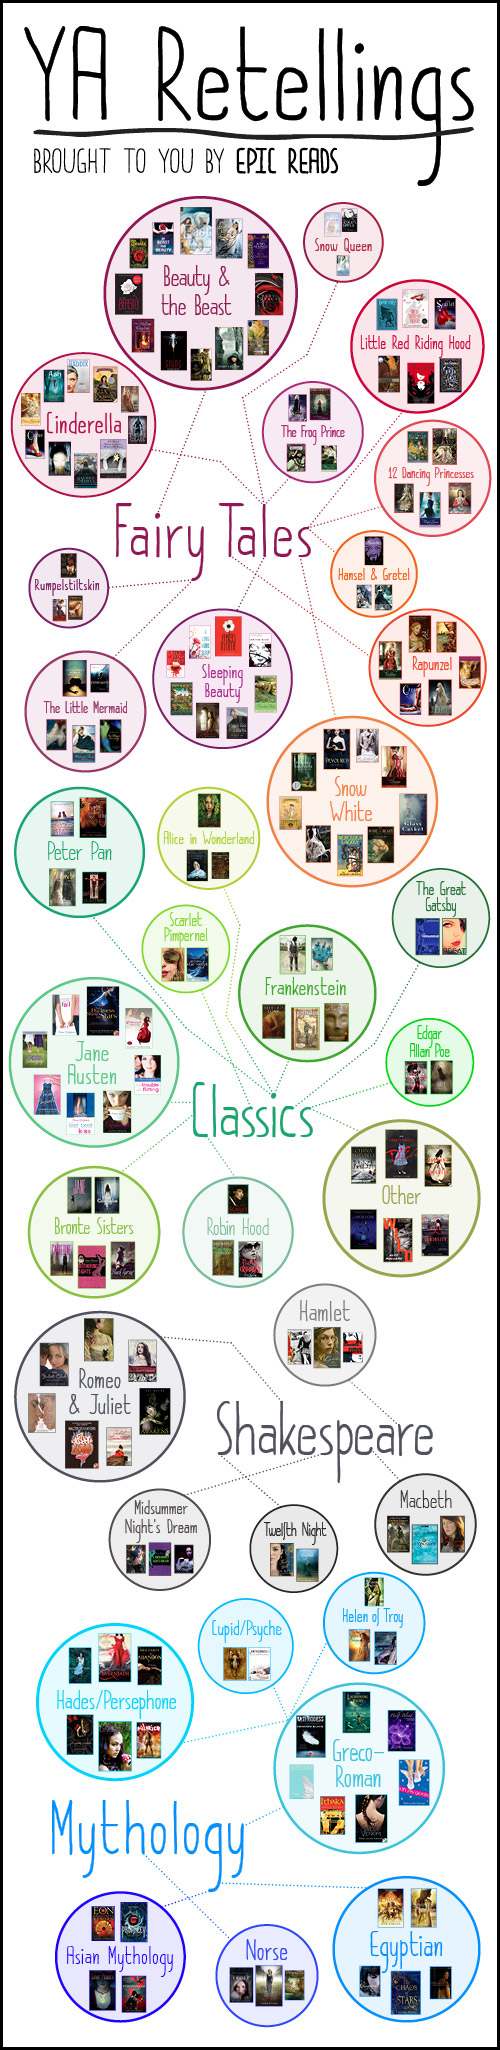 YA RETELLINGS - An epic chart brought to you by EpicReads! 